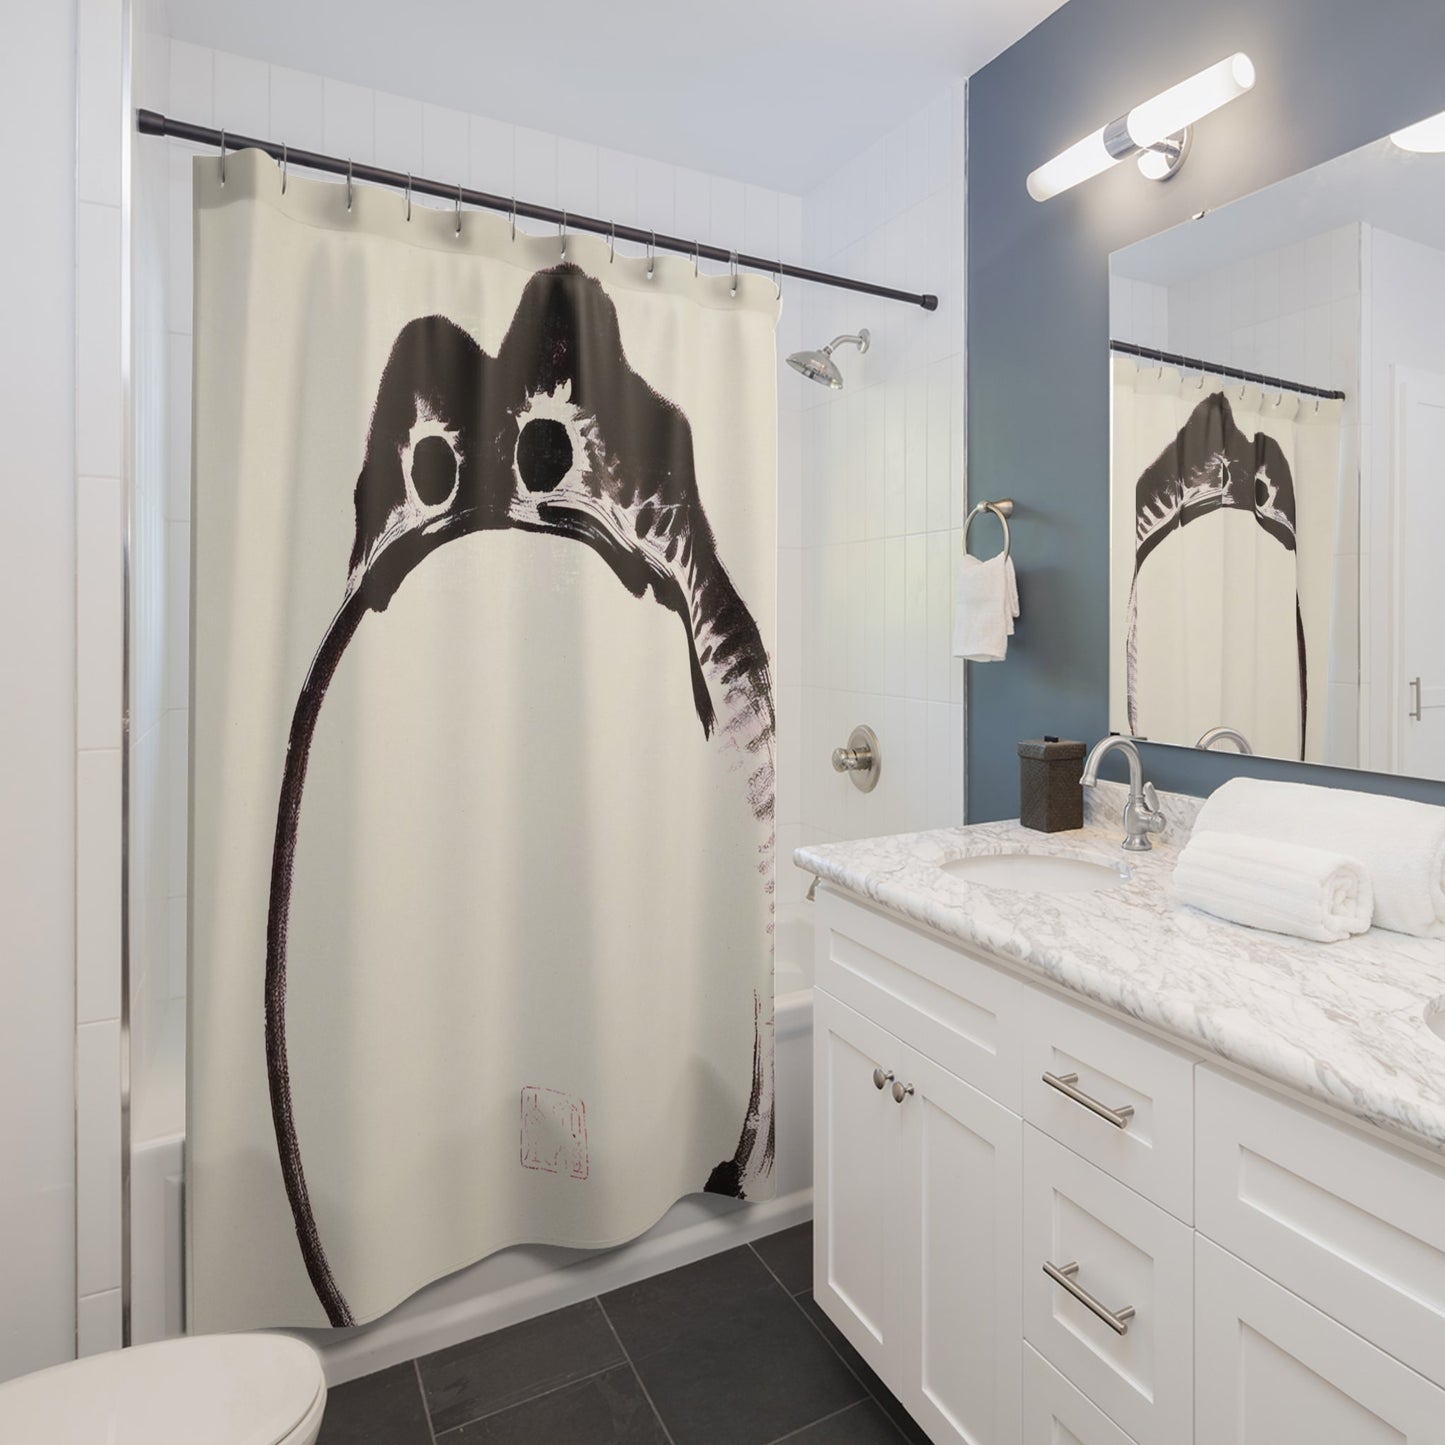 Funny Japanese Toad Shower Curtain Best Bathroom Decorating Ideas for Humor and Fun Decor